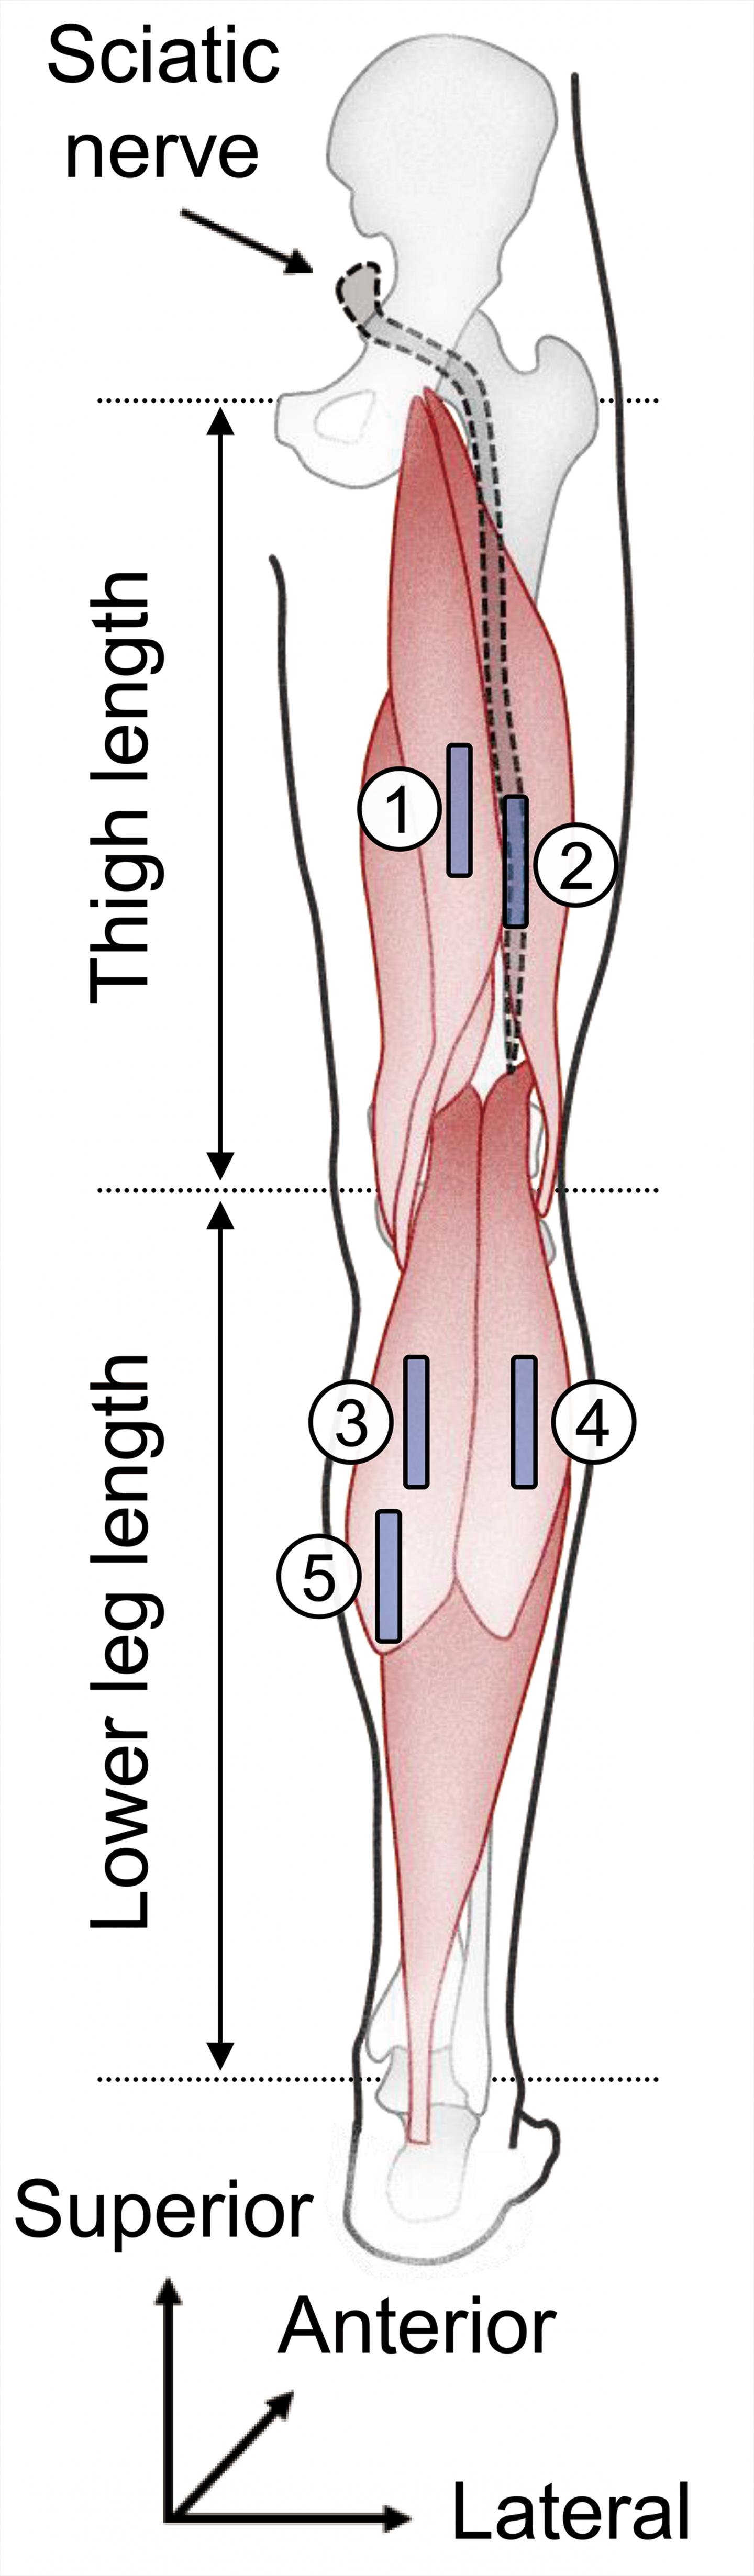 Locations of ultrasound probes to measure tissue stiffness